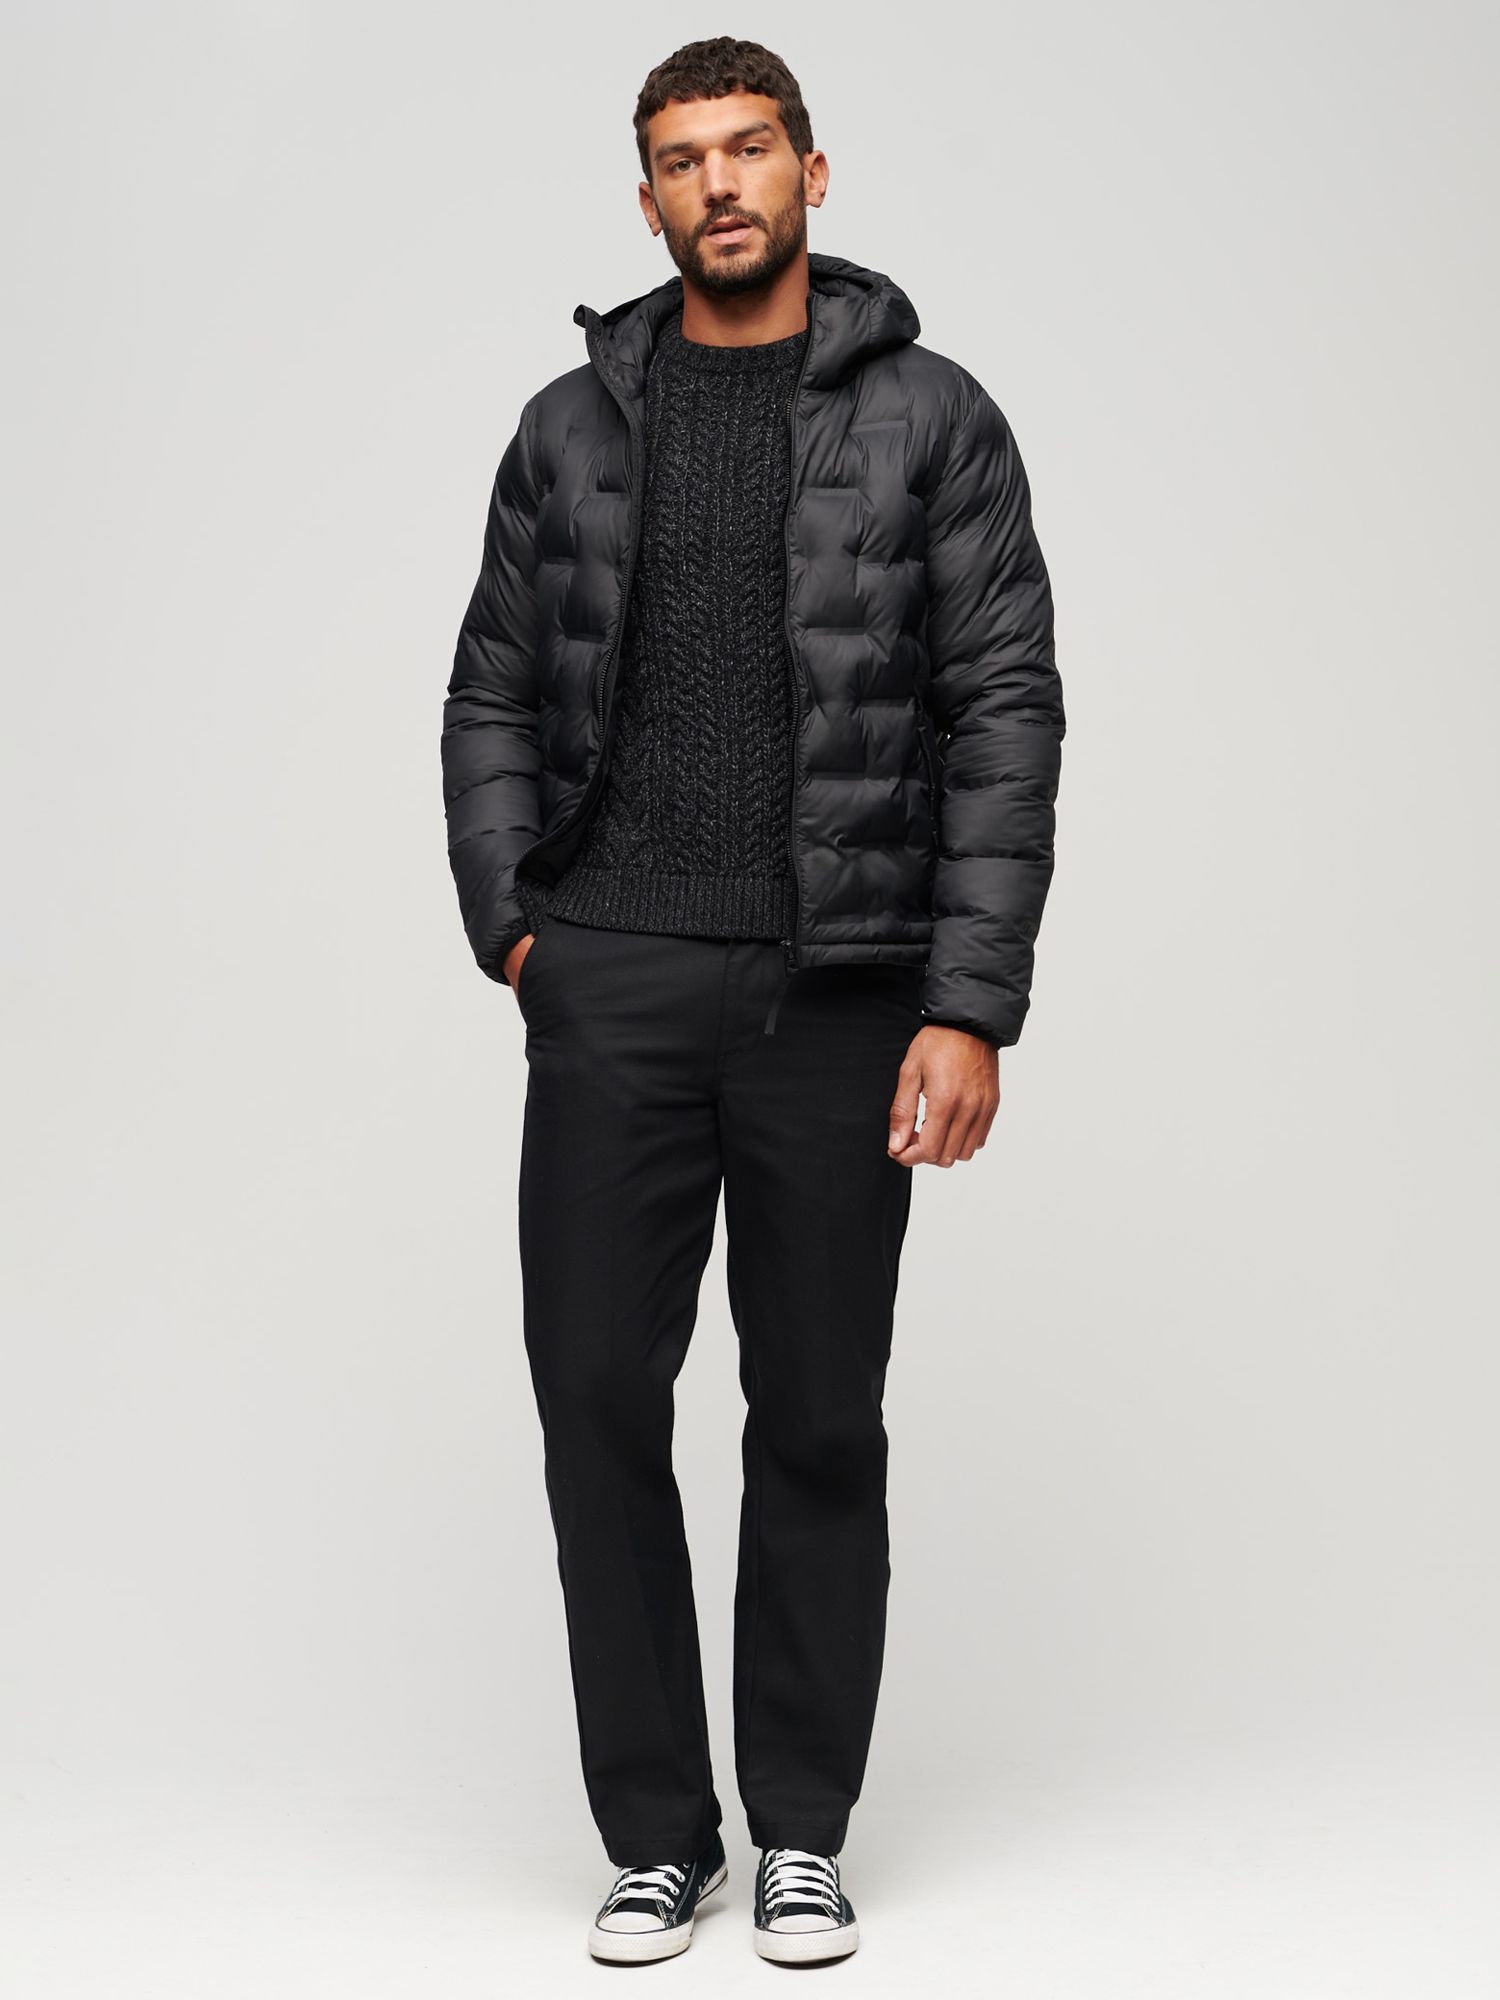 Superdry Short Quilted Puffer Jacket, Black at John Lewis & Partners